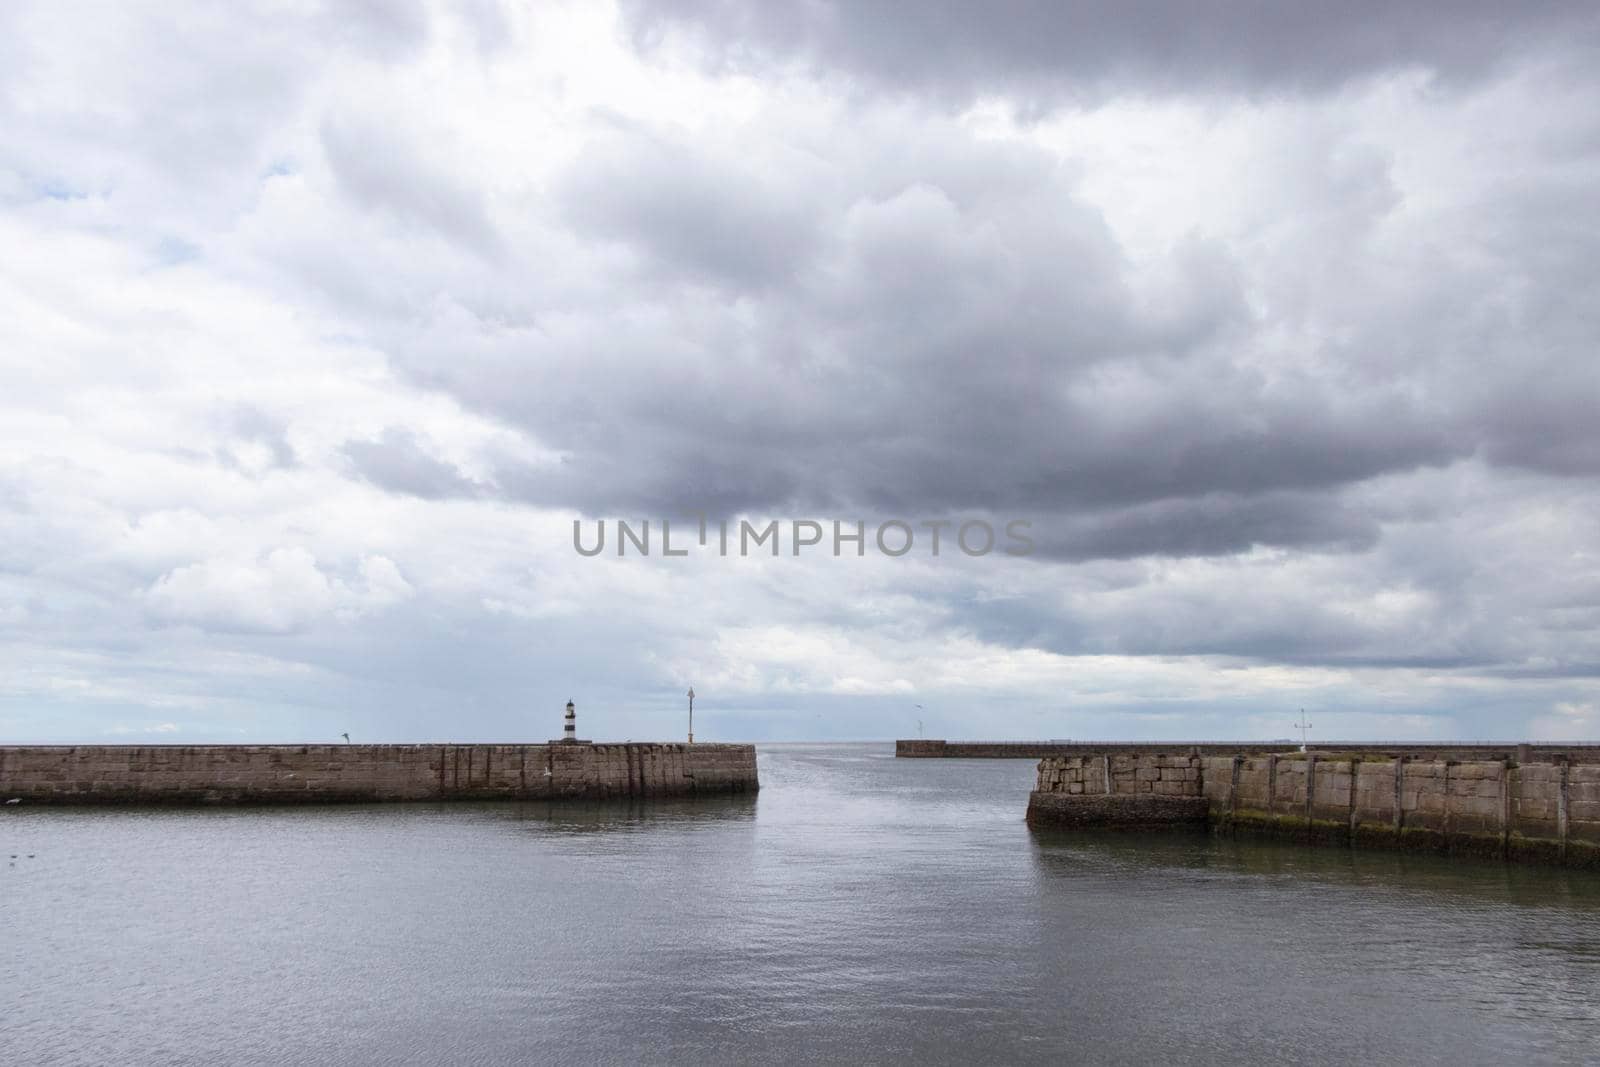 Iconic striped Seaham lighthouse on pier with clouds and sea walls by StefanMal